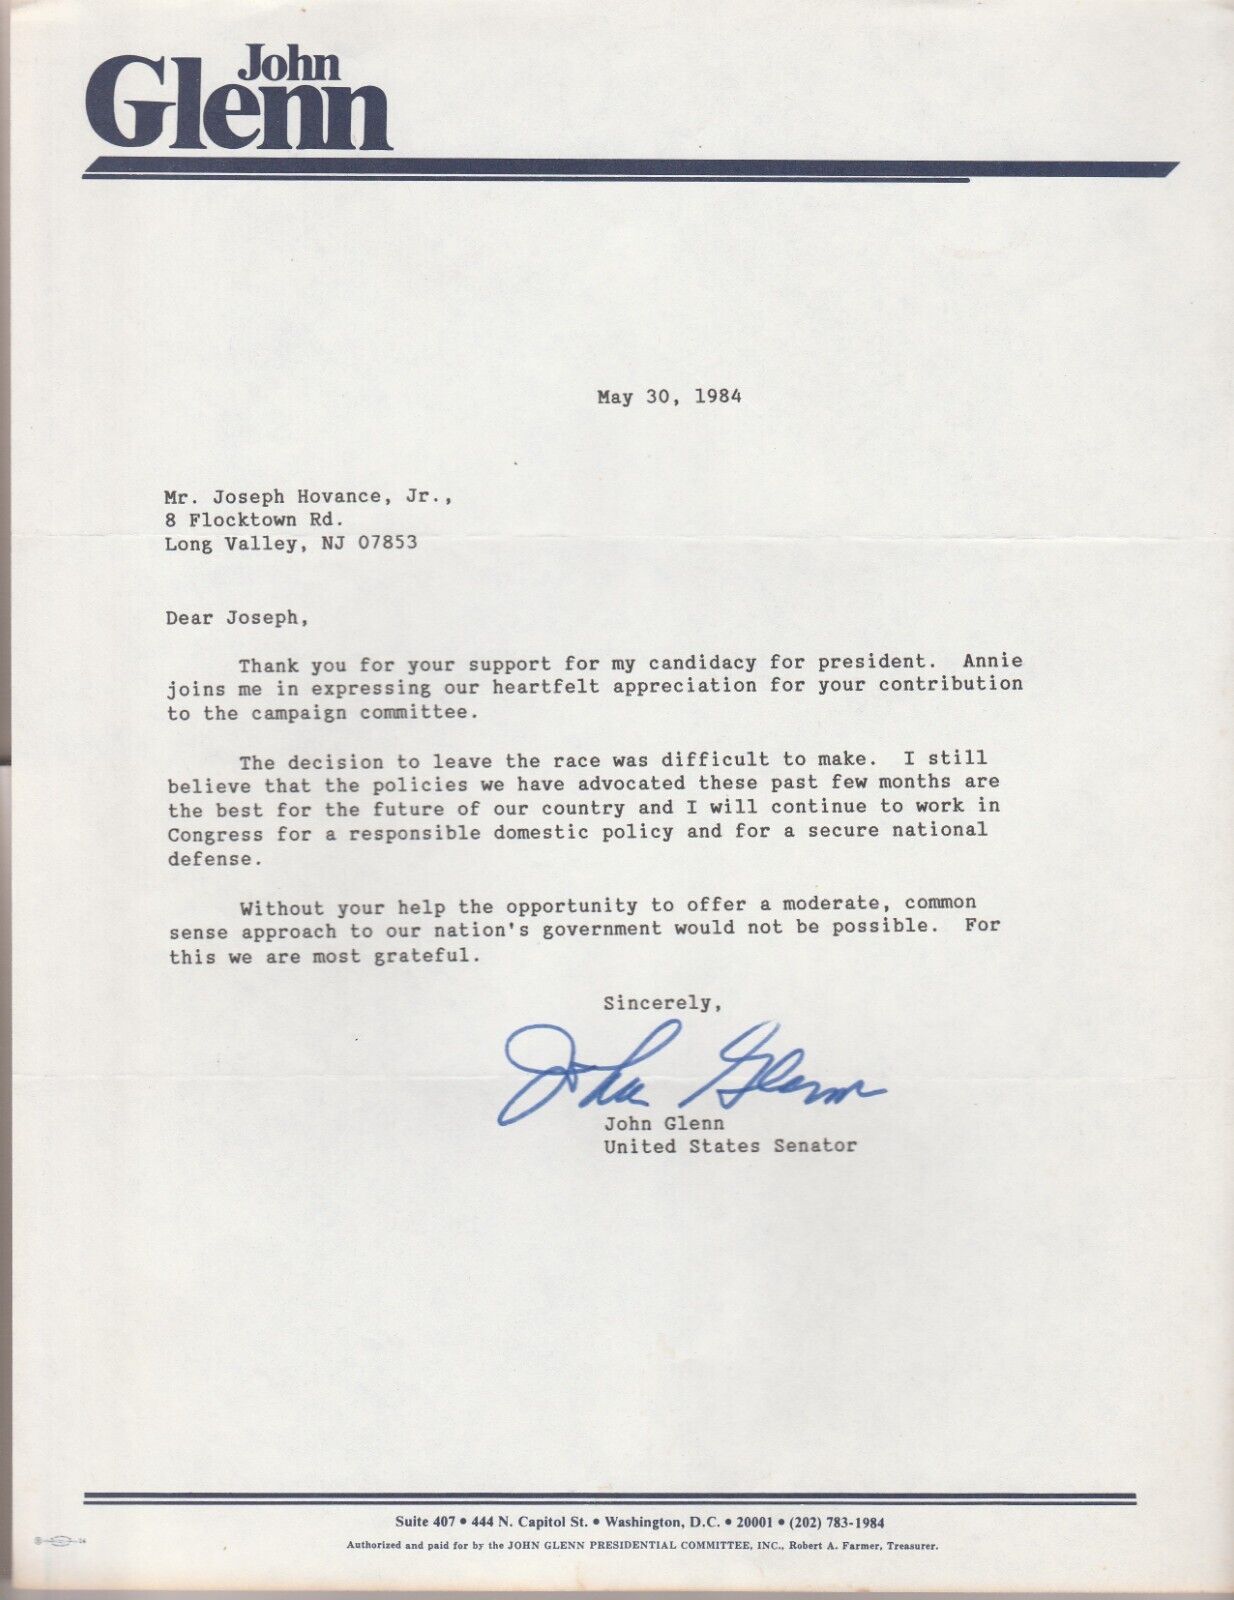 John Glenn Thank You Letter For Support In Presidential Campaign May 30, 1984